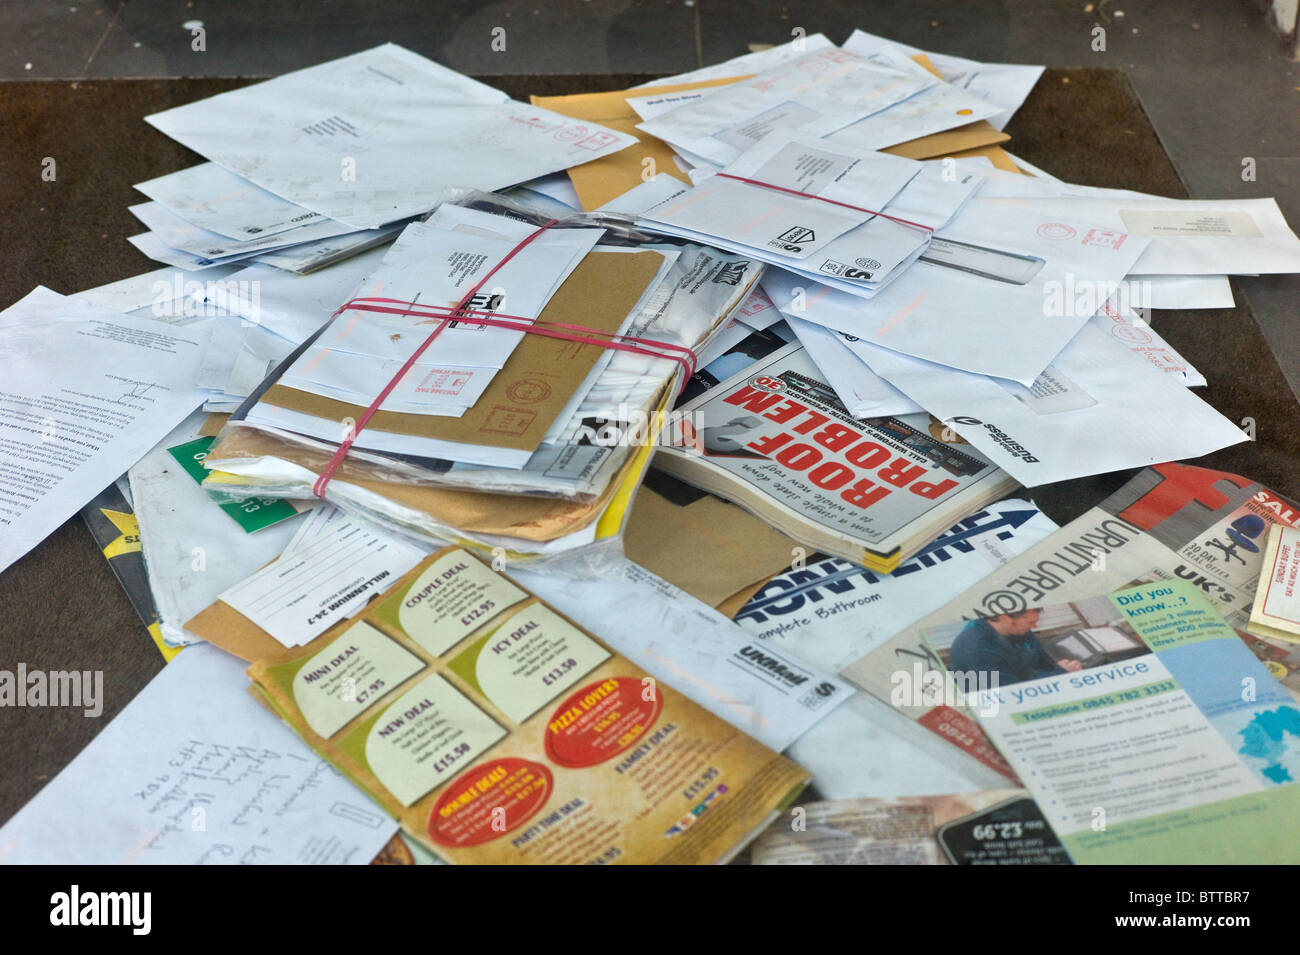 https://c8.alamy.com/comp/BTTBR7/a-pile-of-unopened-mail-on-the-doormat-of-a-closed-down-business-BTTBR7.jpg